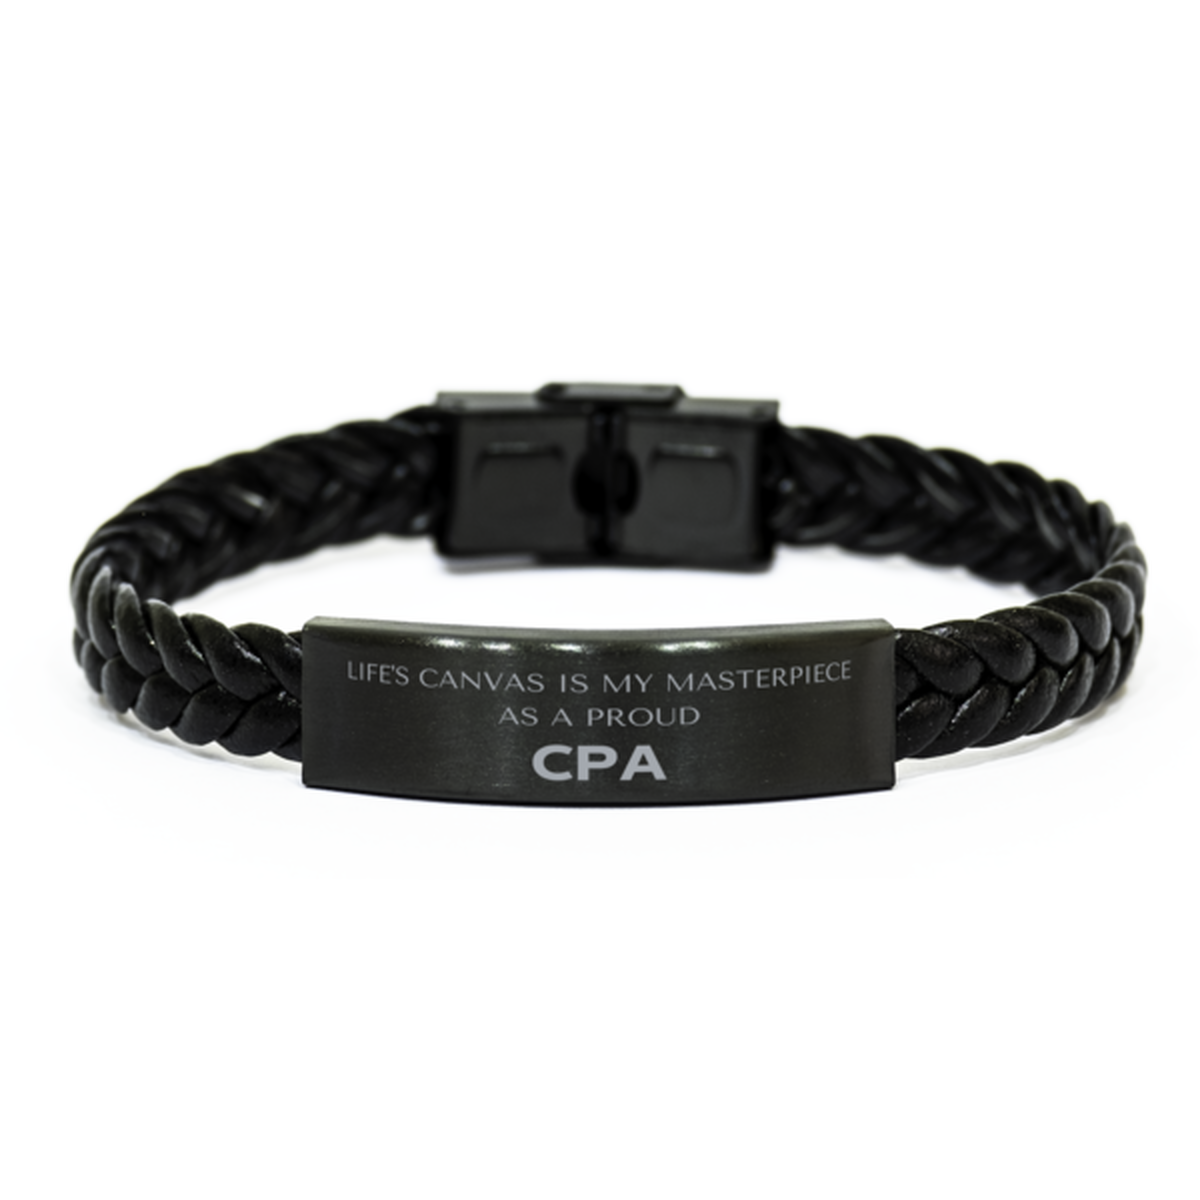 Proud CPA Gifts, Life's canvas is my masterpiece, Epic Birthday Christmas Unique Braided Leather Bracelet For CPA, Coworkers, Men, Women, Friends